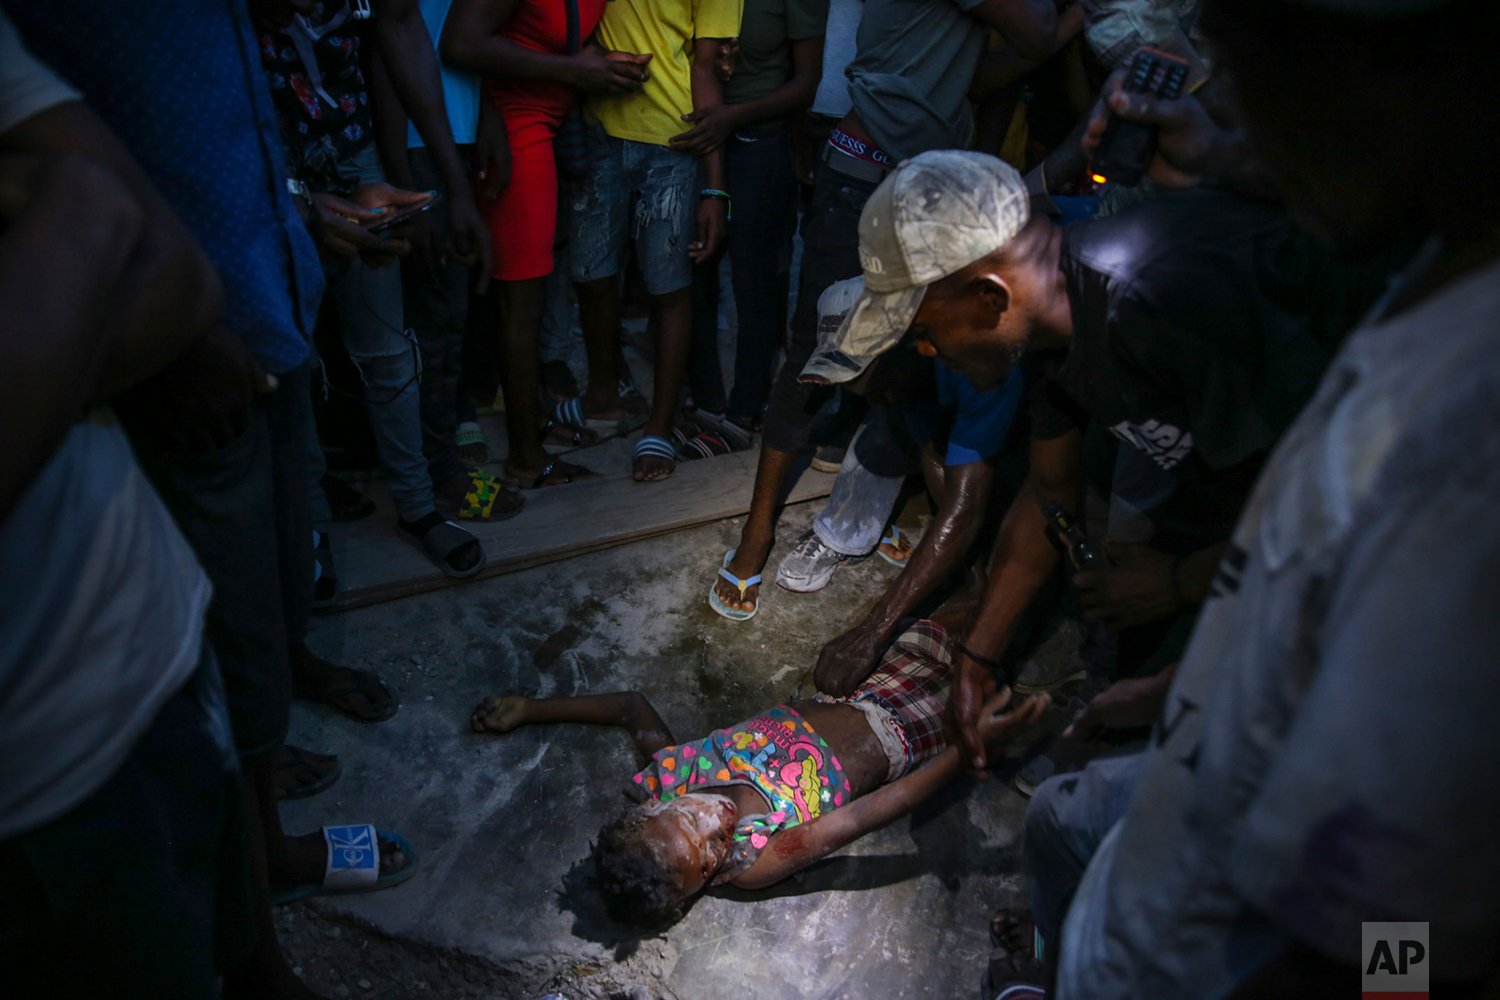  People look at the body of Esther Daniel, 7, who died under the rubble of a house destroyed by the earthquake in Les Cayes, Haiti, Saturday, Aug. 14, 2021. A 7.2 magnitude earthquake struck Haiti on Saturday, with the epicenter about 125 kilometers 